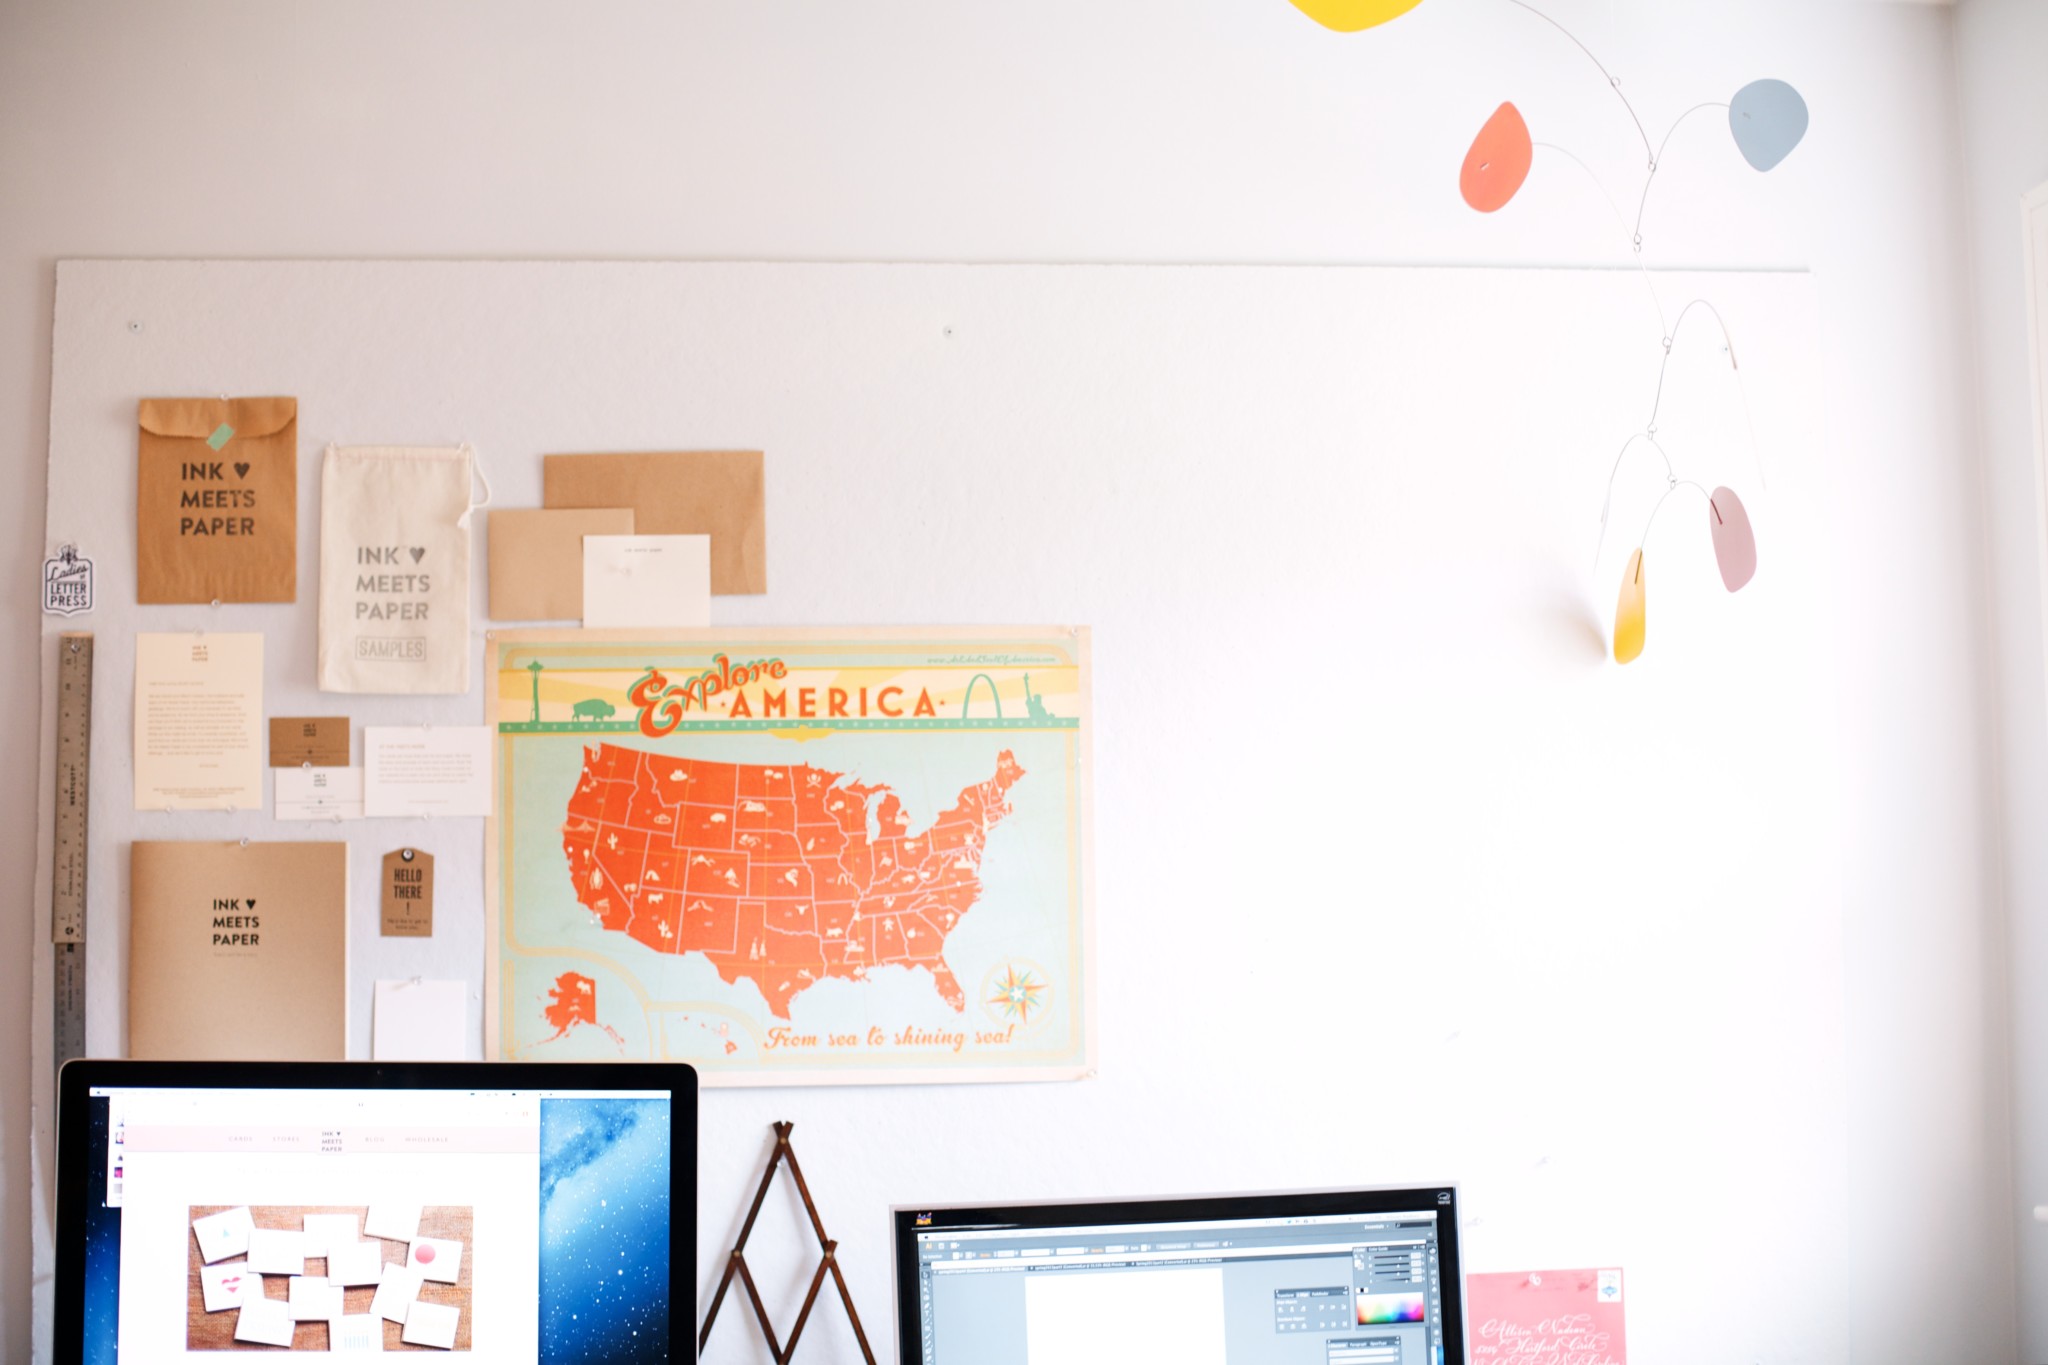 Two computer monitors are in the foreground with INK MEETS PAPER brand collateral pinned to the wall in the background along with a map of the United States